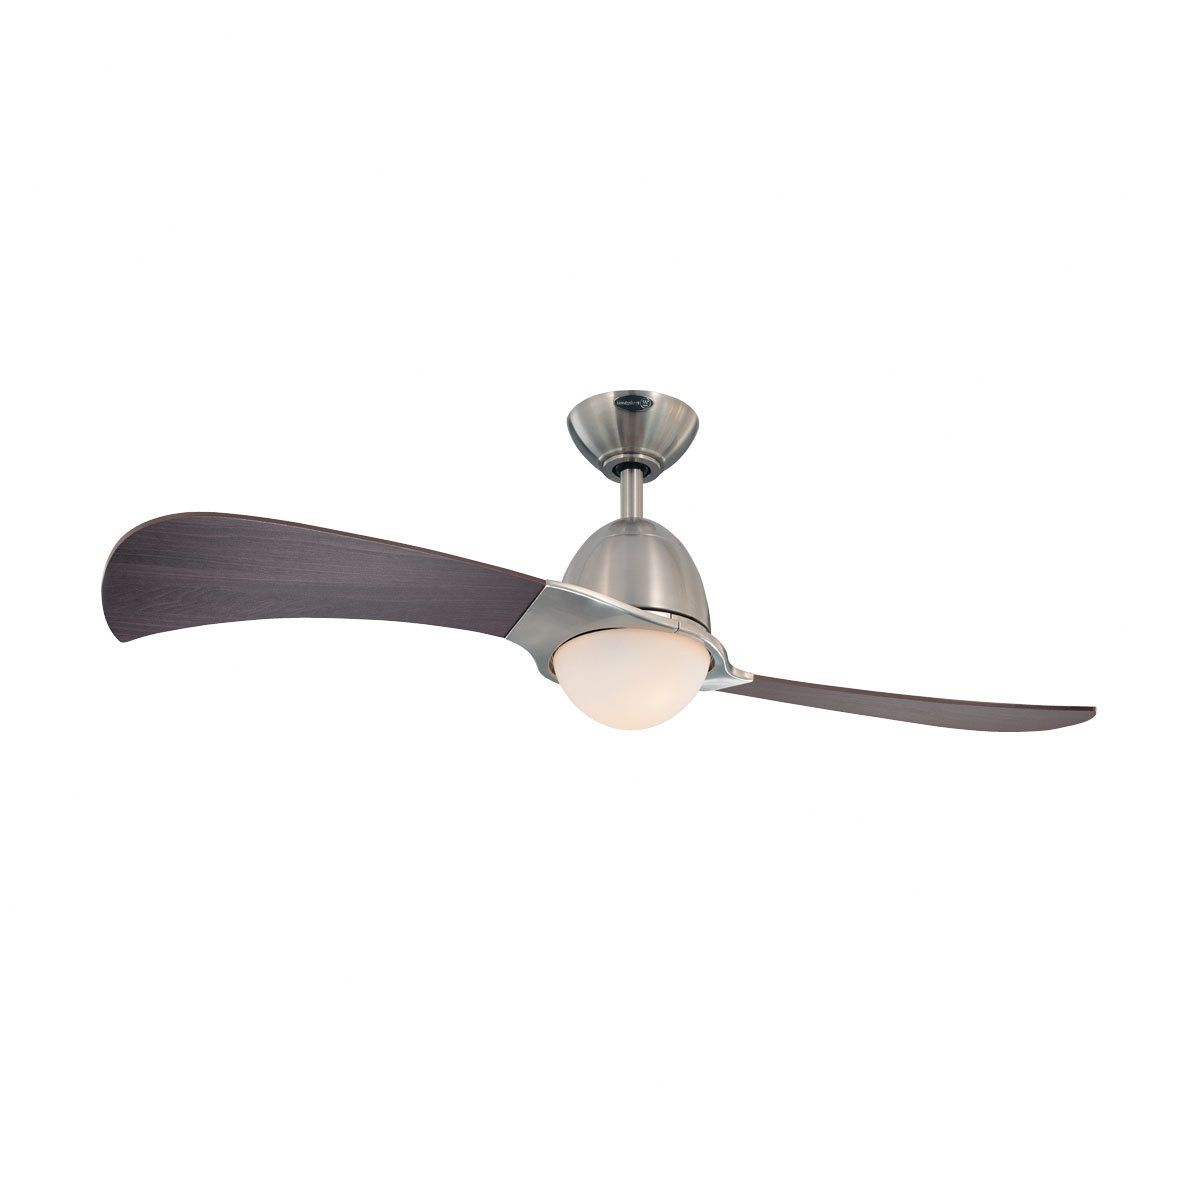 48" Amezquita 2 Blade Led Ceiling Fan With Remote Light Kit Included With Regard To Trendy Wisp 3 Blade Led Ceiling Fans (View 19 of 20)